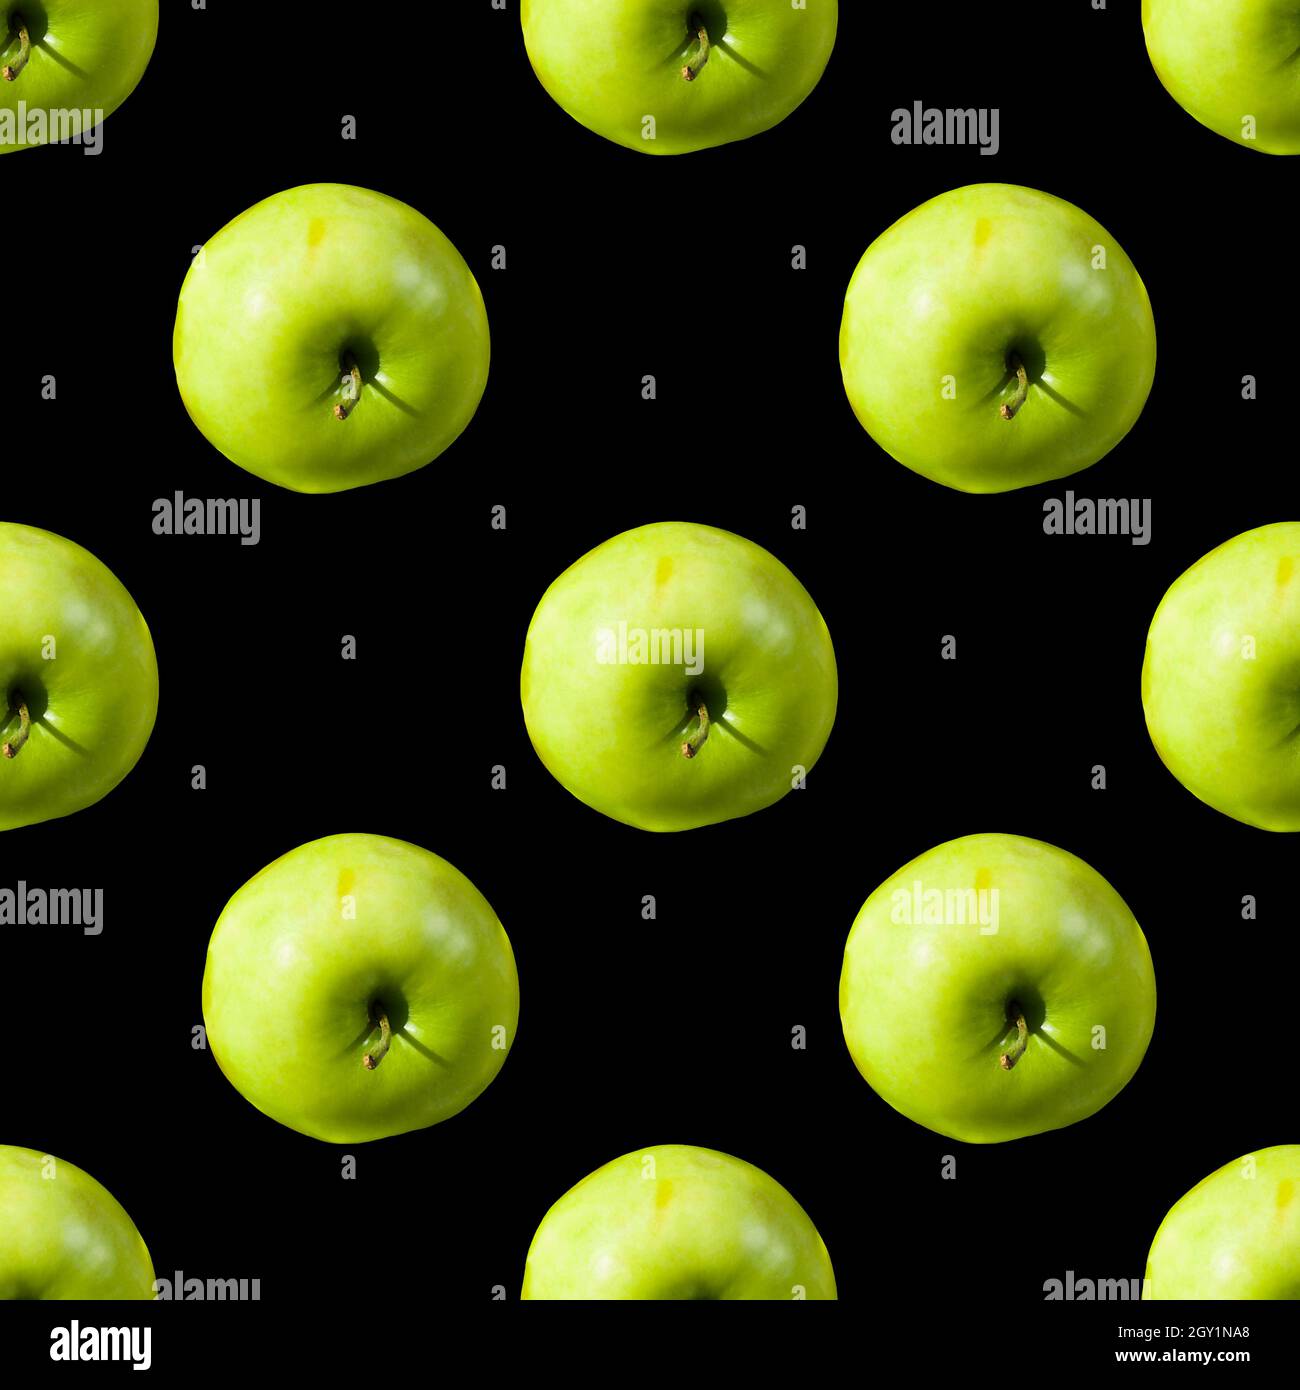 Seamless pattern from green apples on a black background. Photo collage. Stock Photo